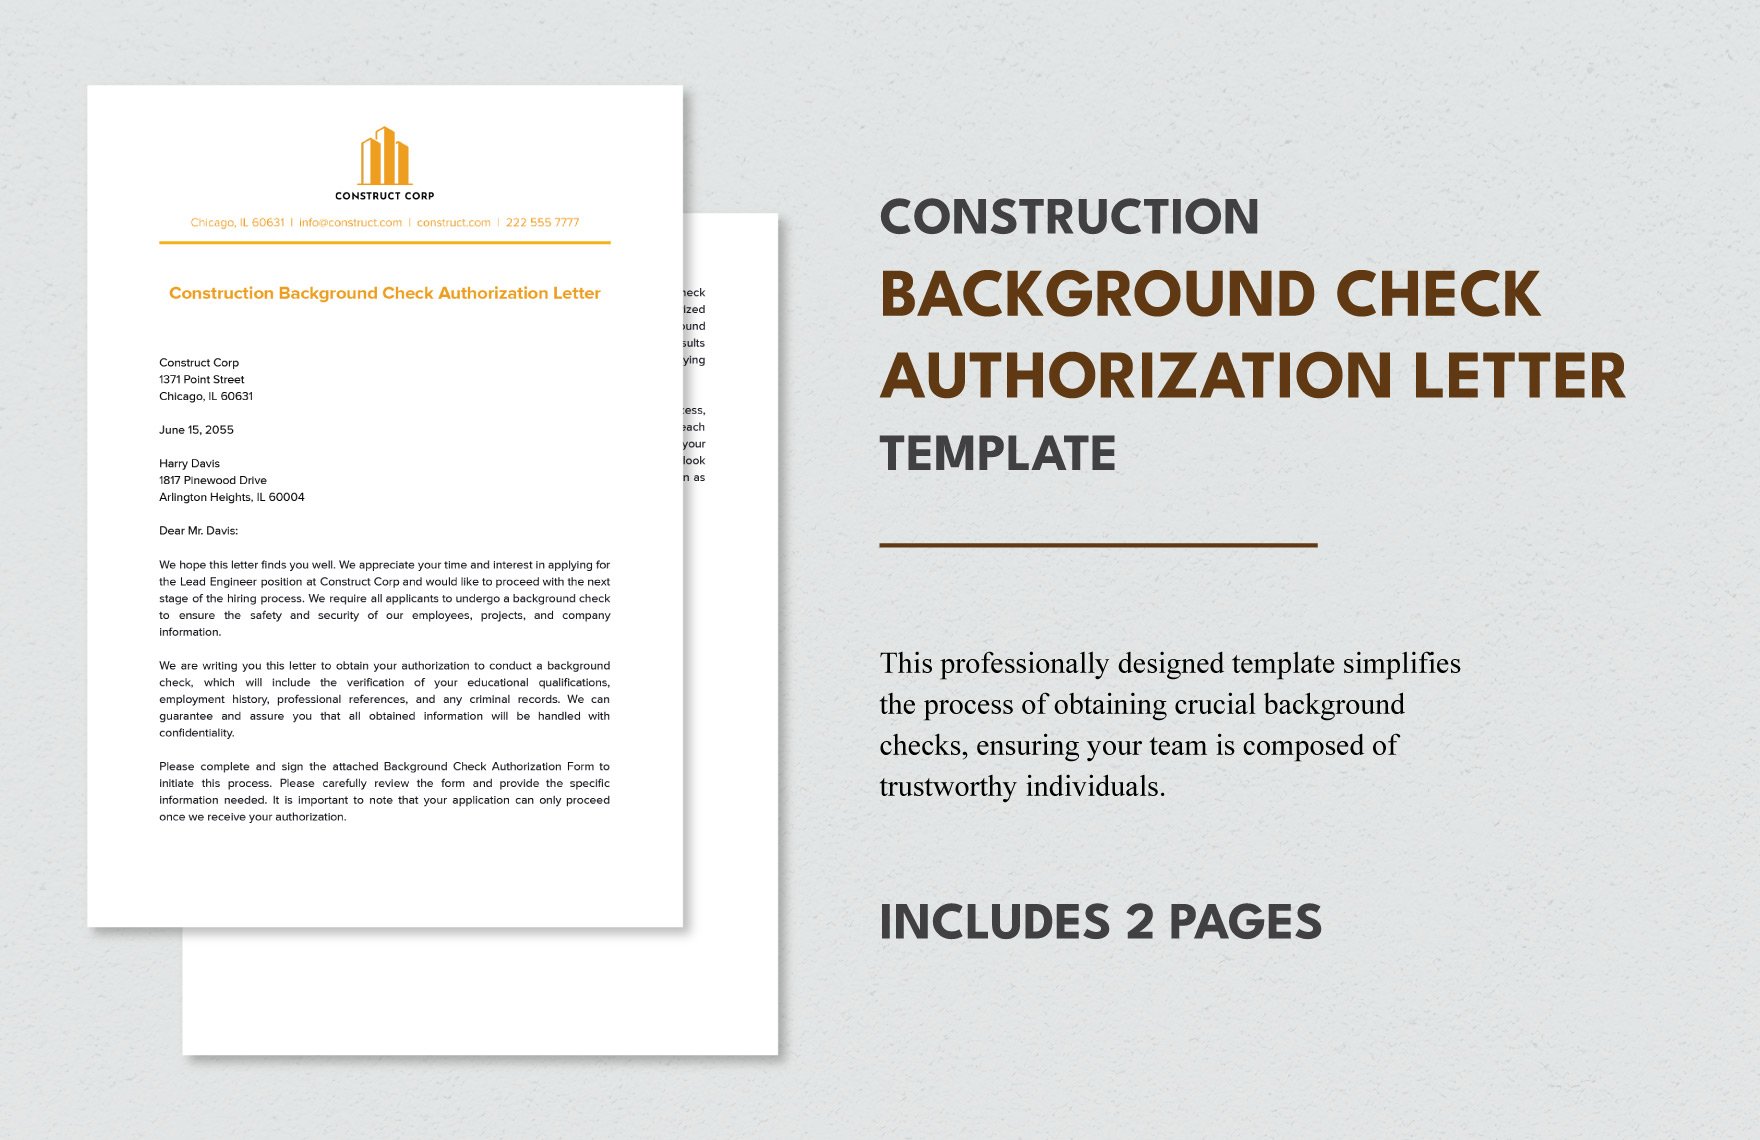 Construction Background Check Authorization Letter Template